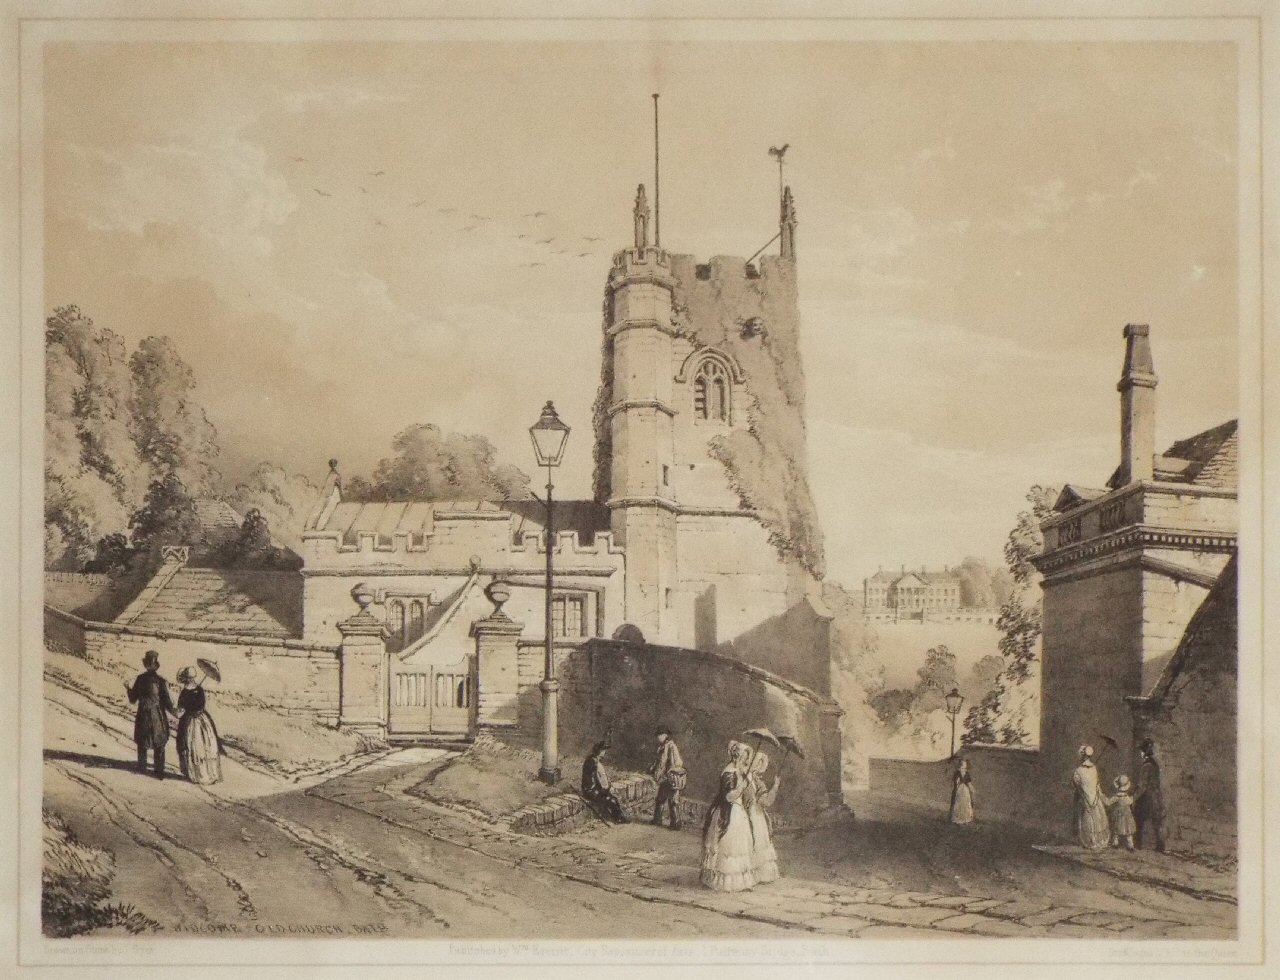 Lithograph - Widcombe Old Church, Bath. - Syer